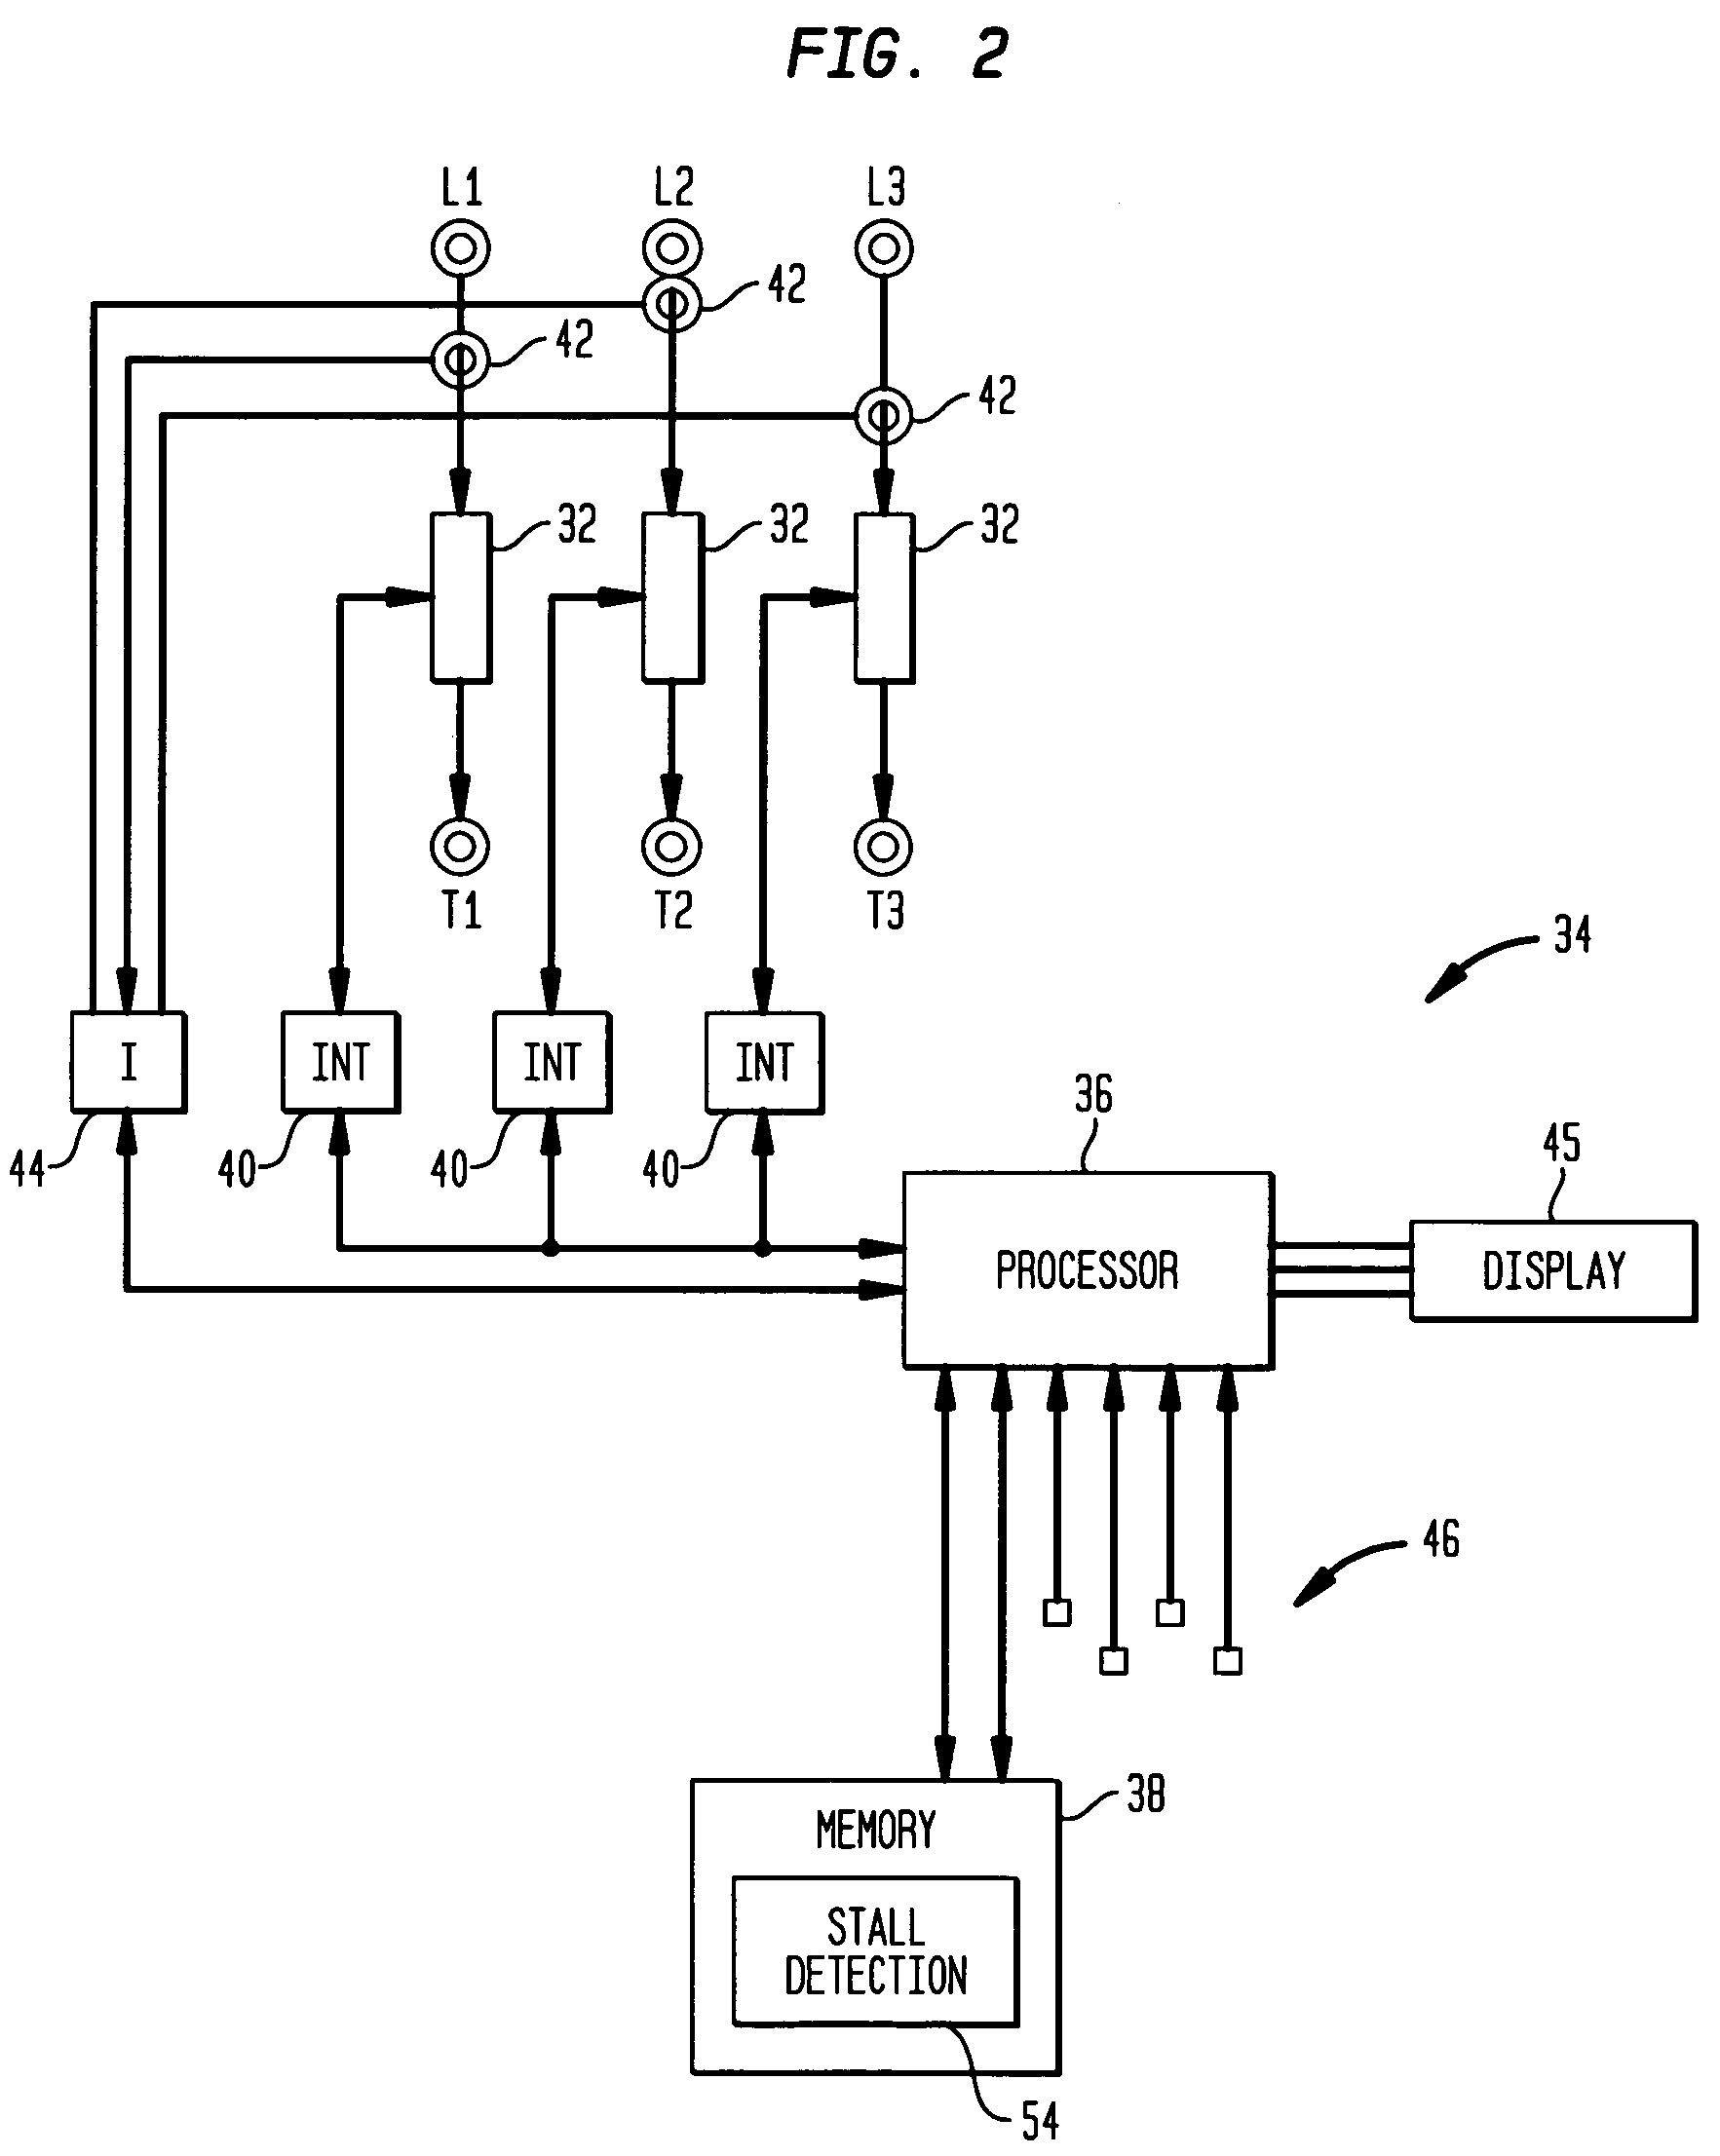 System and method for stall detection of a motor